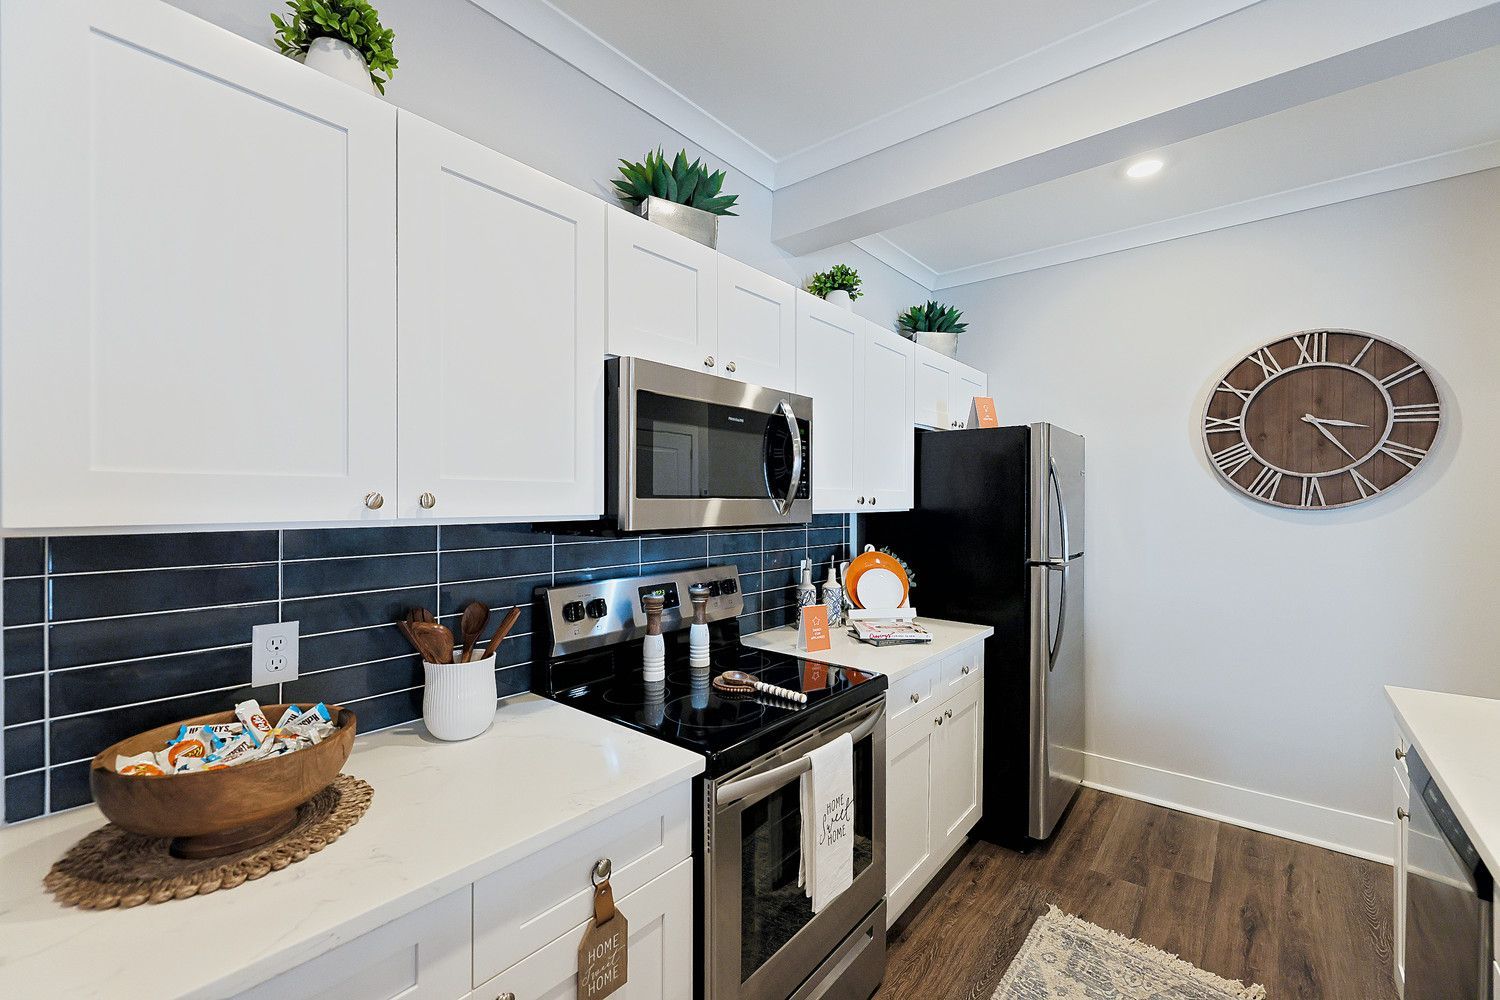 Apartment kitchen with white cabinets, stainless steel appliances, and a clock on the wall.